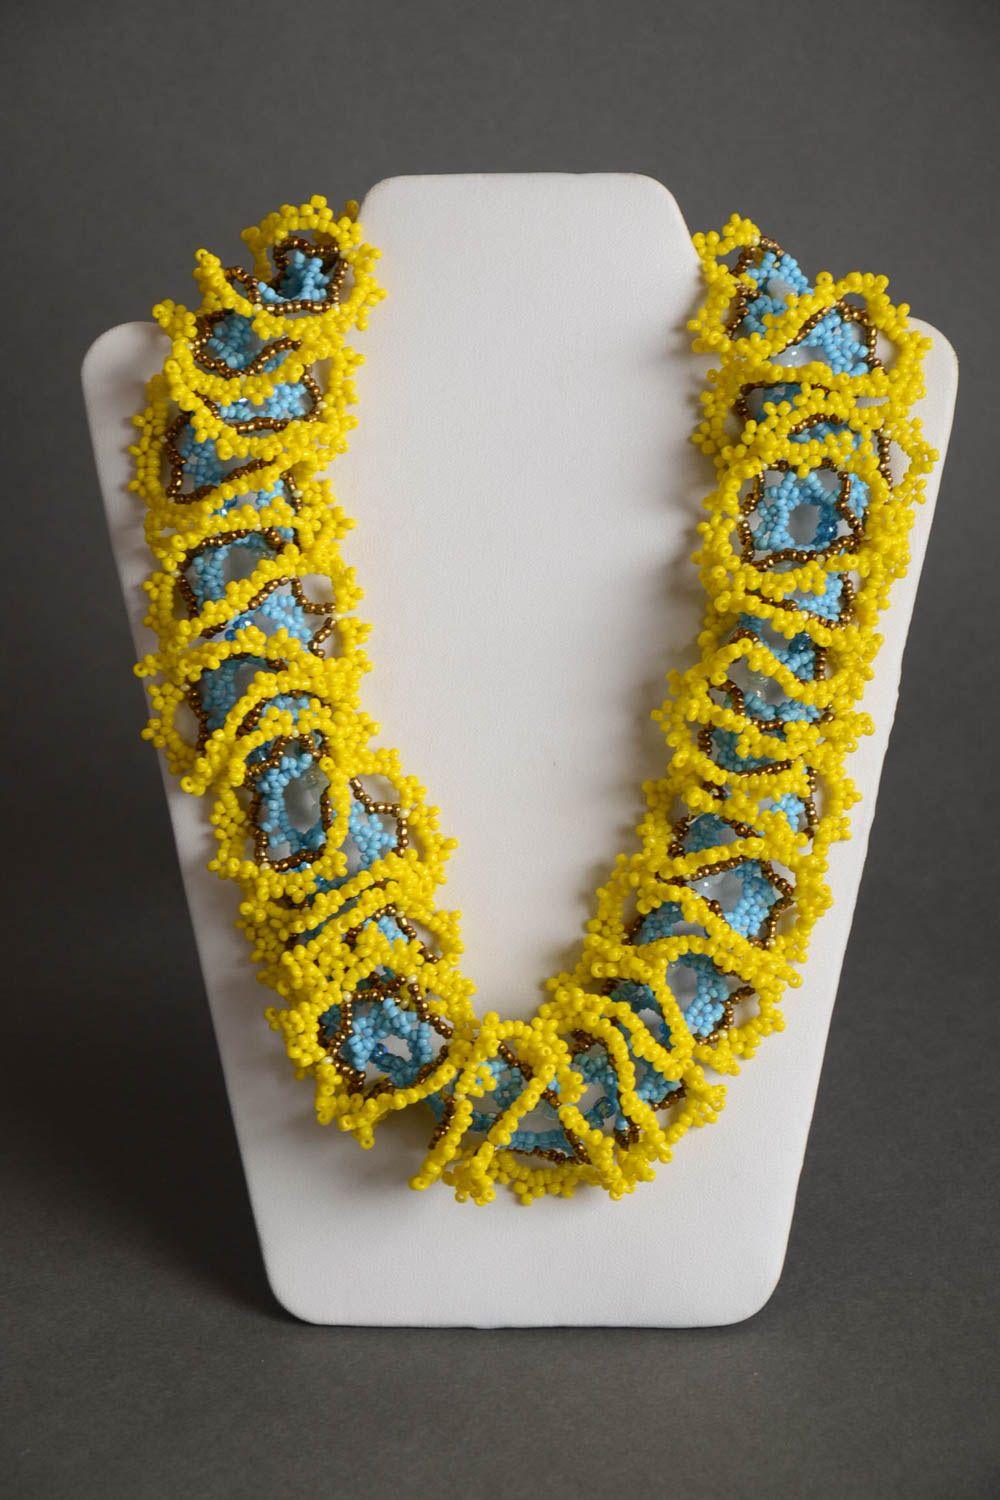 Handmade designer women's necklace woven of bright yellow and blue Czech beads photo 2